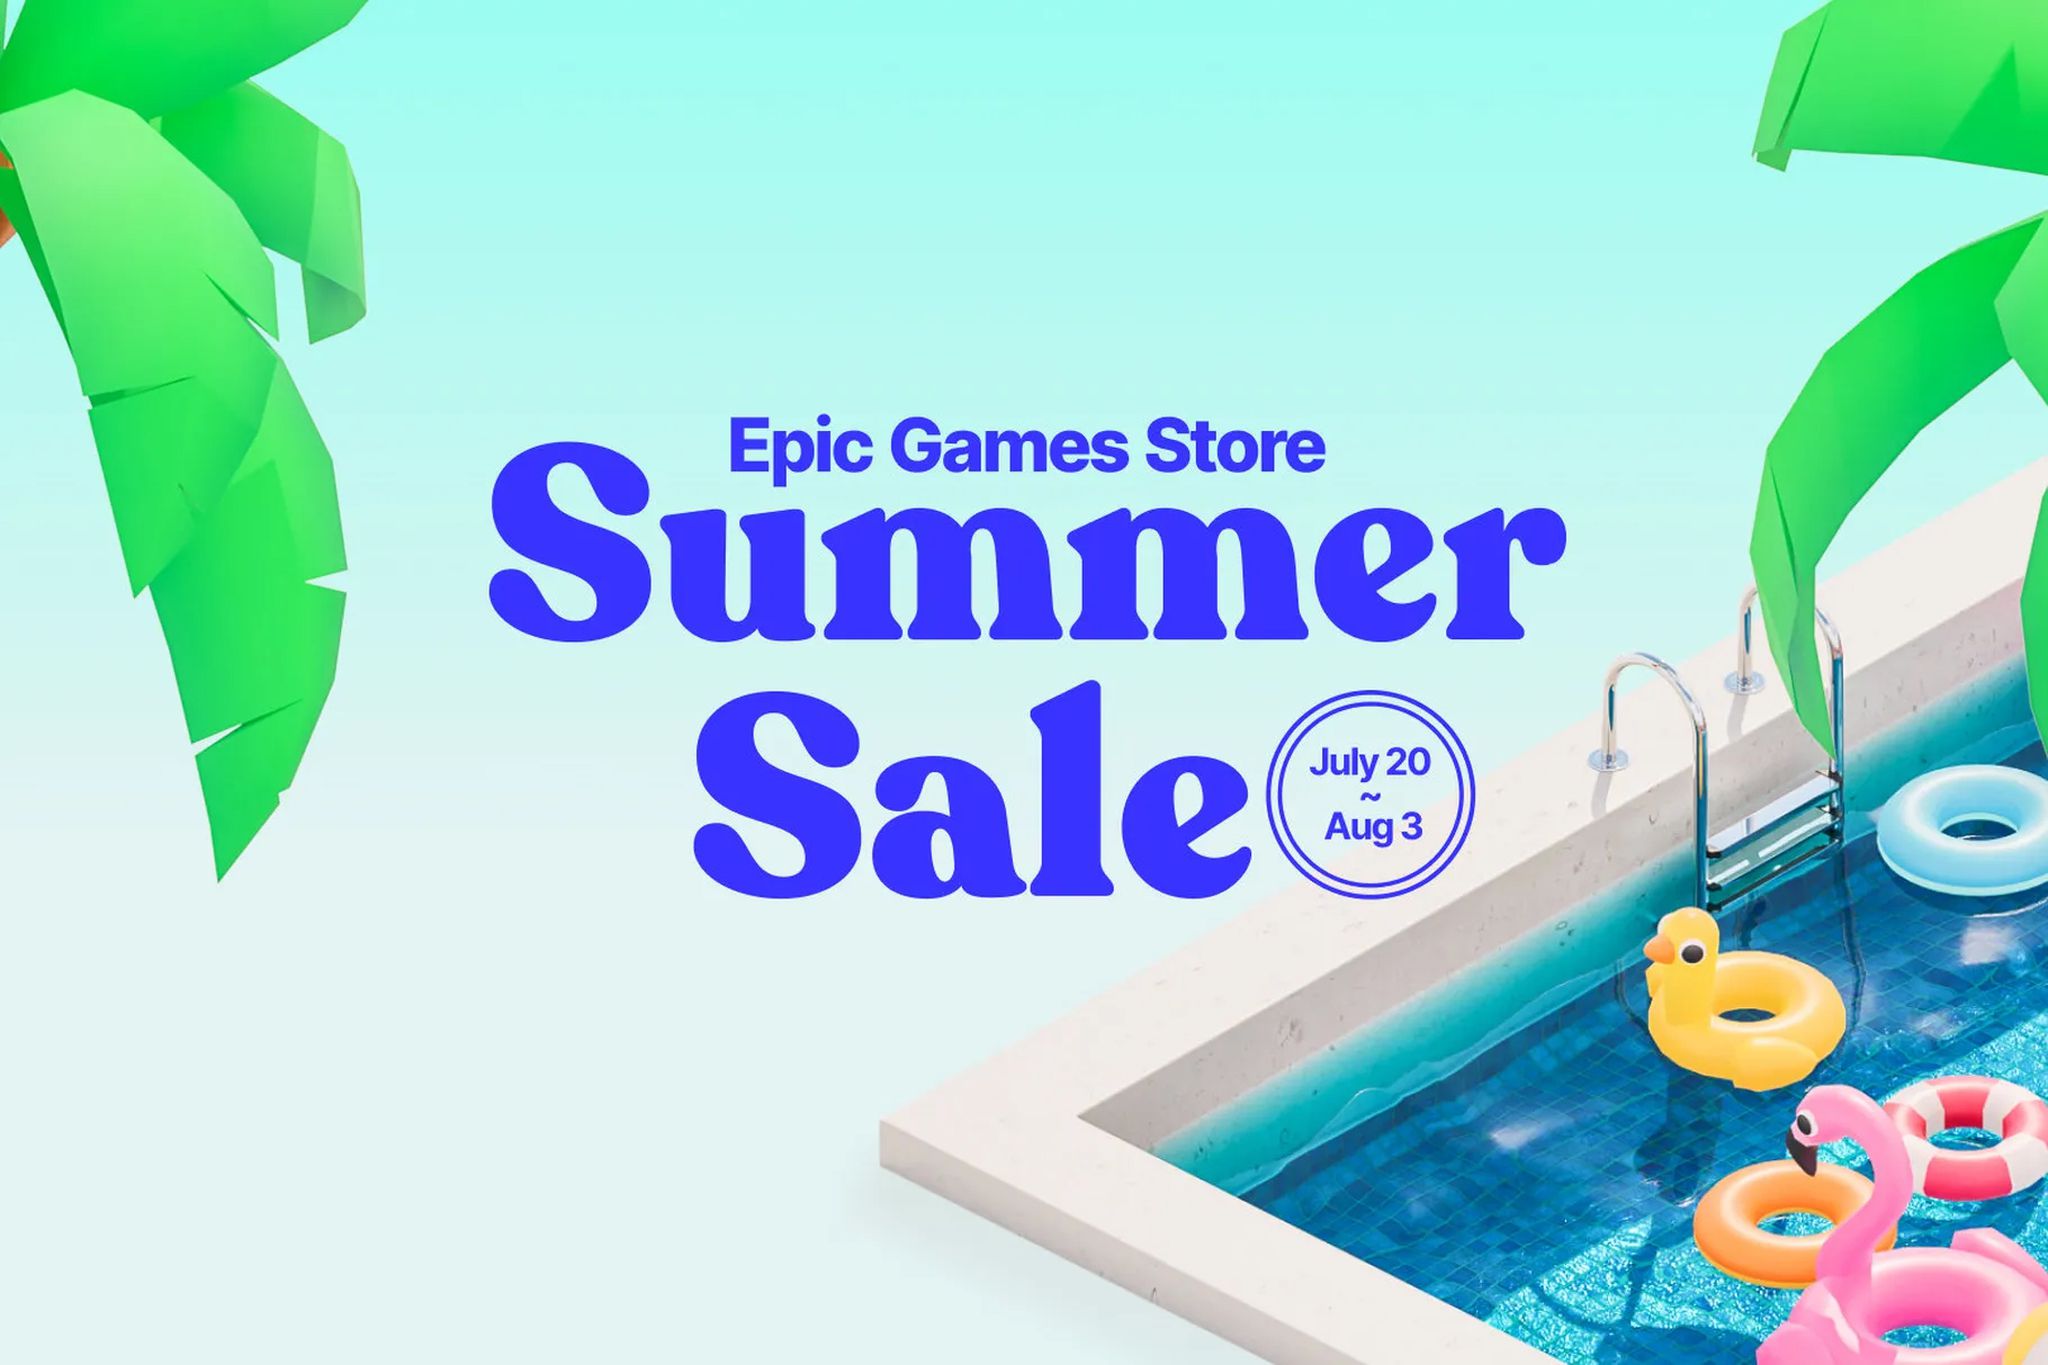 Epic Games is taking 75 percent off select titles as part of its summer